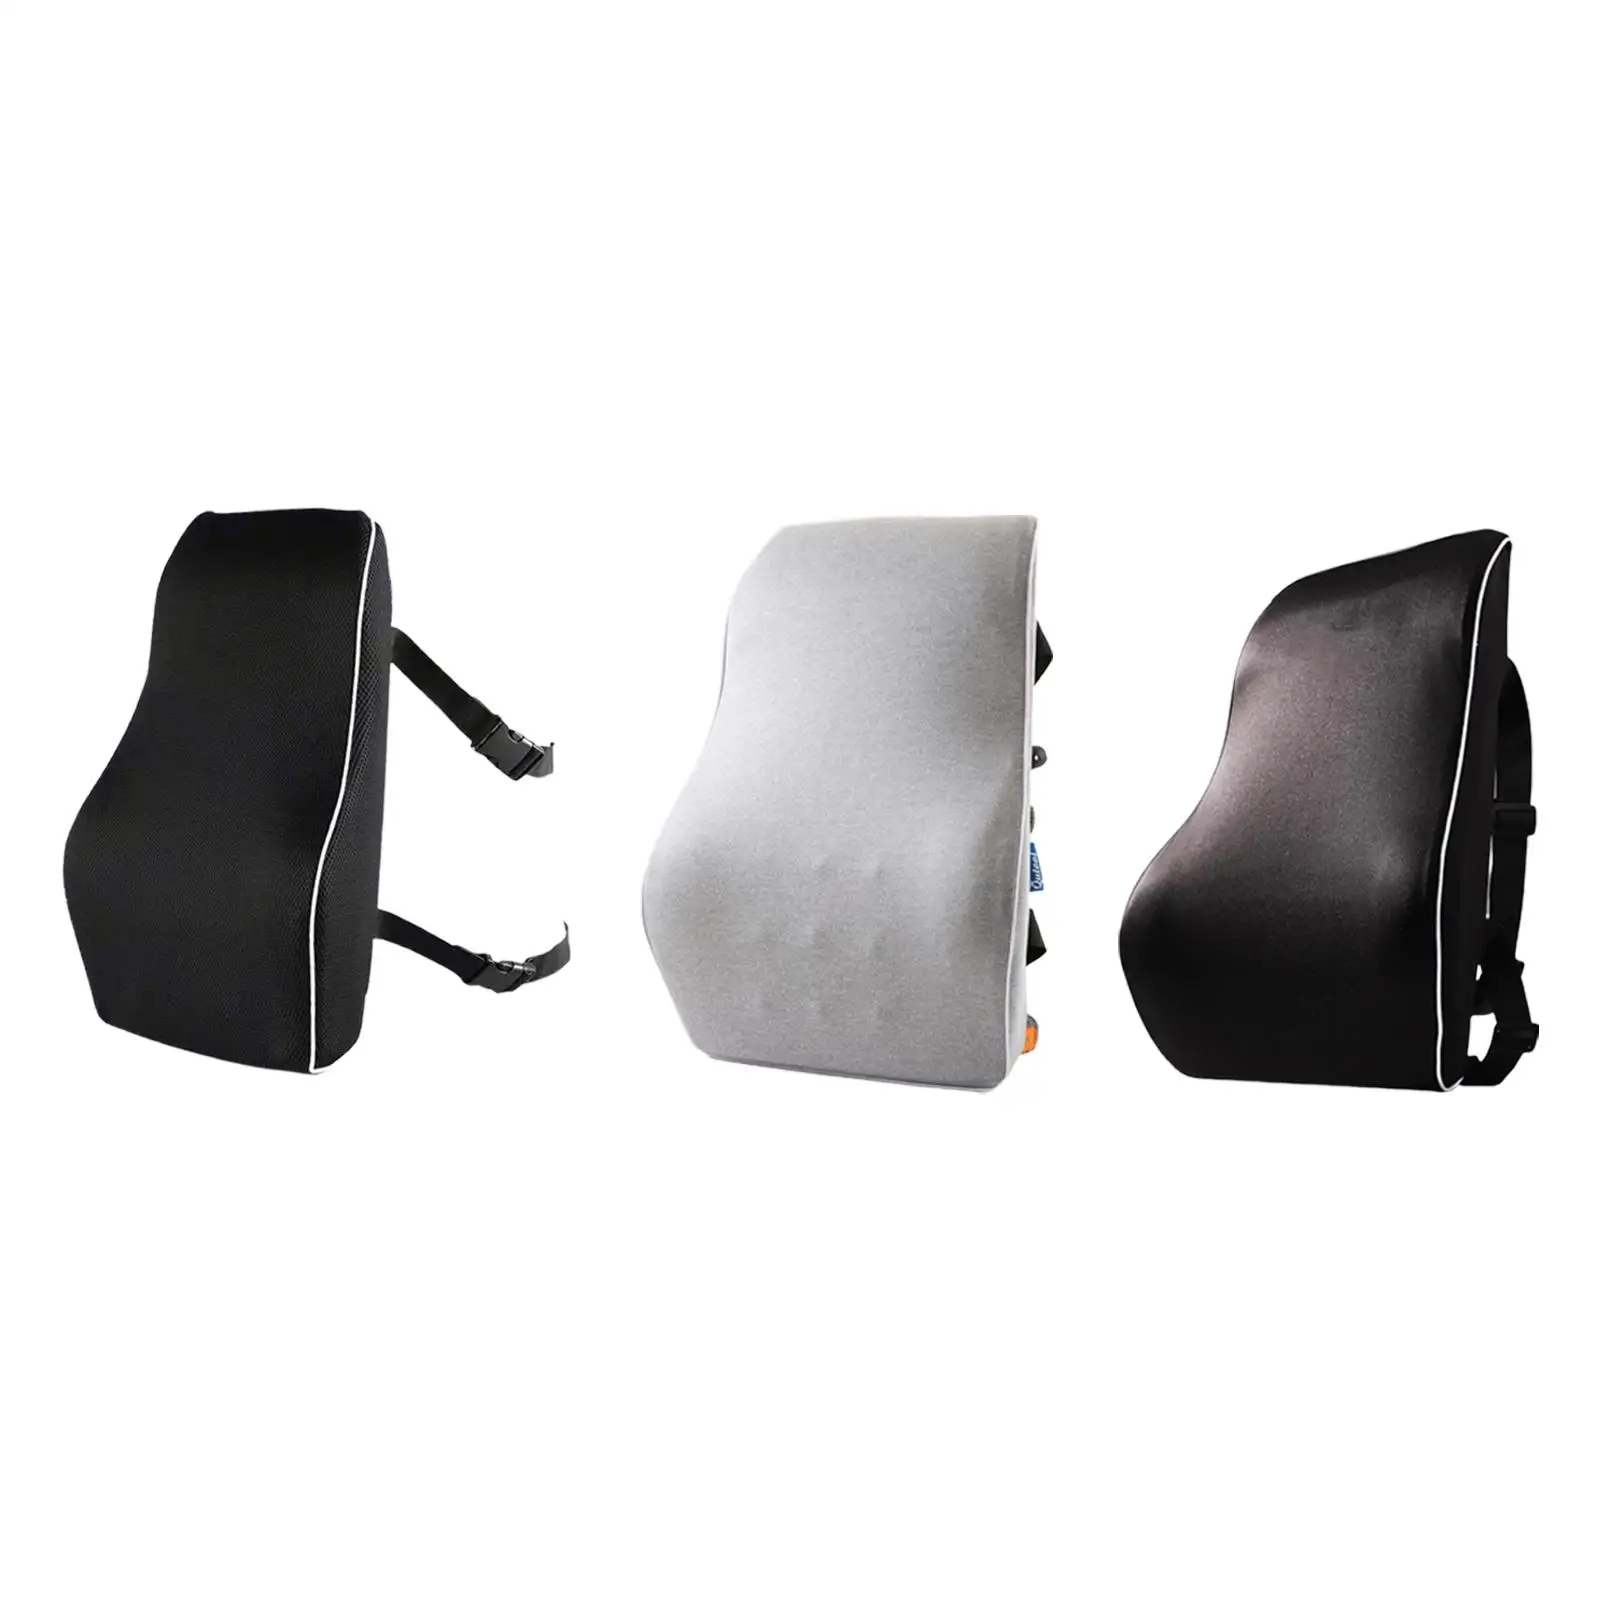 Lumbar s Backrest Relieve Back Pressure Comfort Back Cushion for Computer Chair Home Office Chair Drivers Elderly